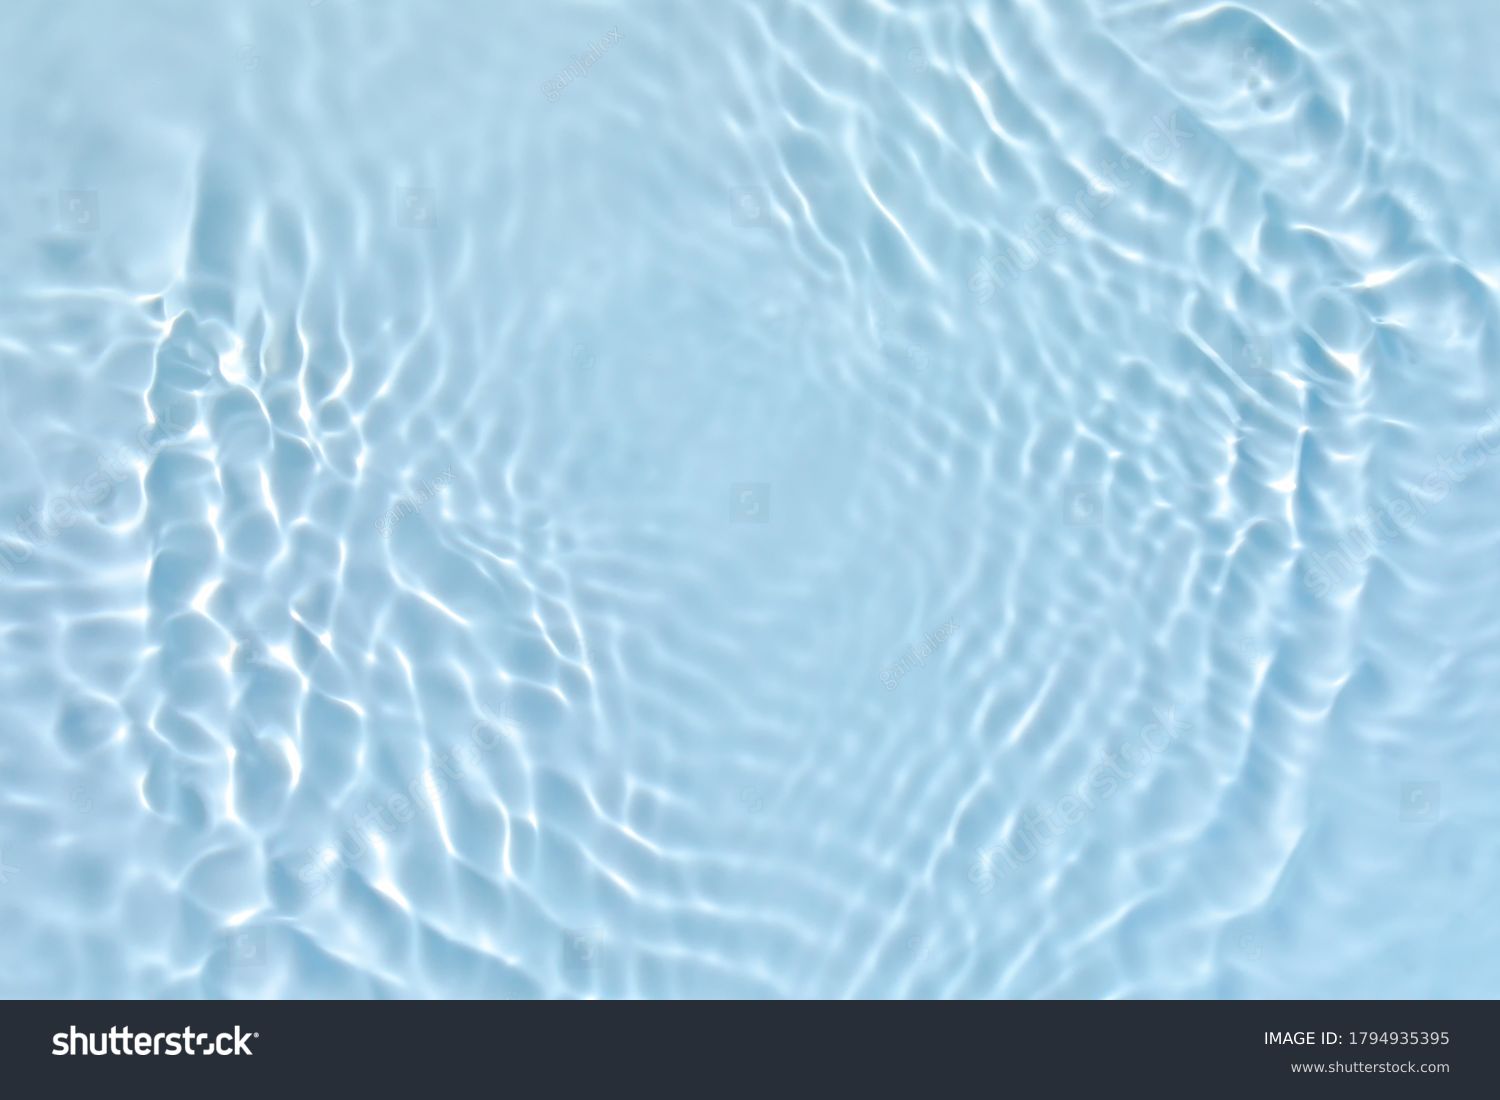 Blurred transparent blue colored clear calm water surface texture with splashes and bubbles. Trendy abstract nature background. Water waves in sunlight. #1794935395